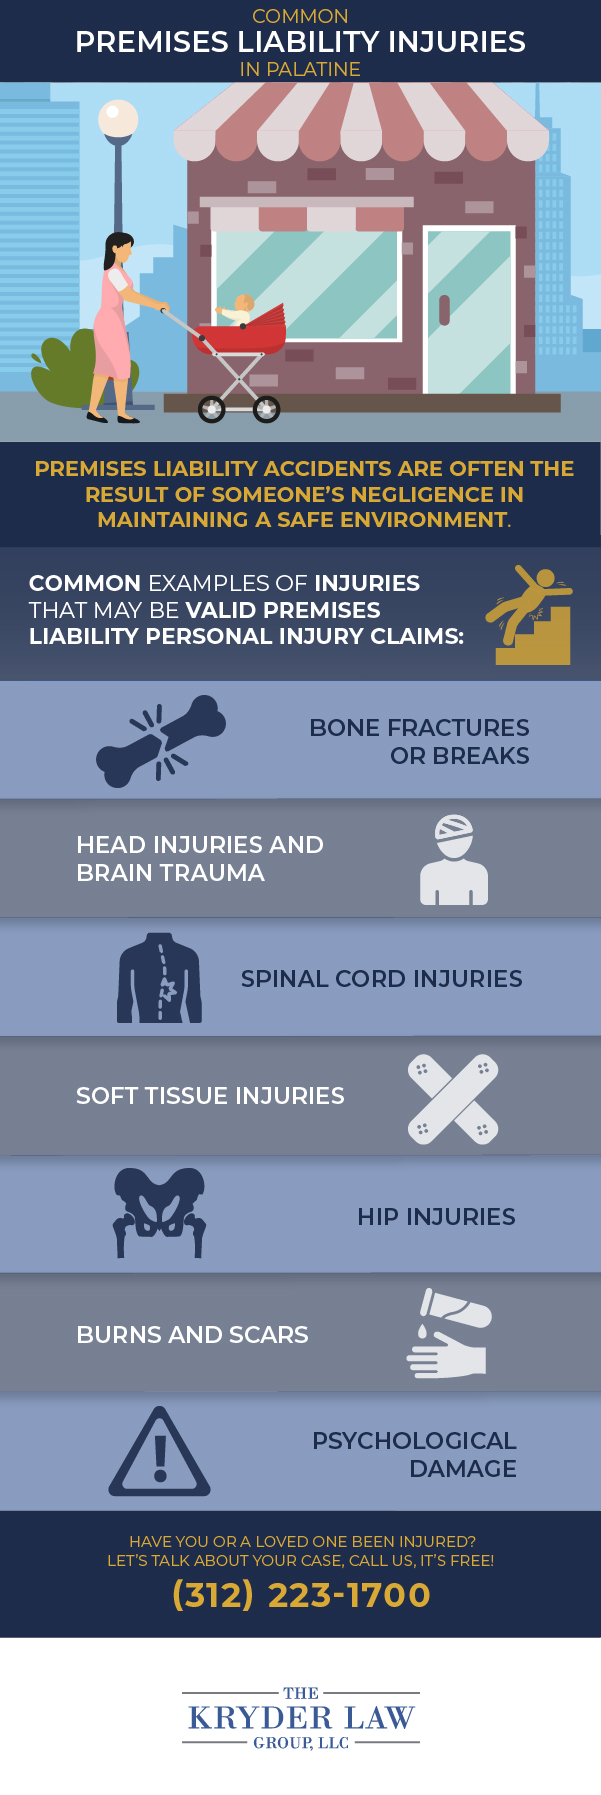 Common Premises Liability Injuries in Palatine